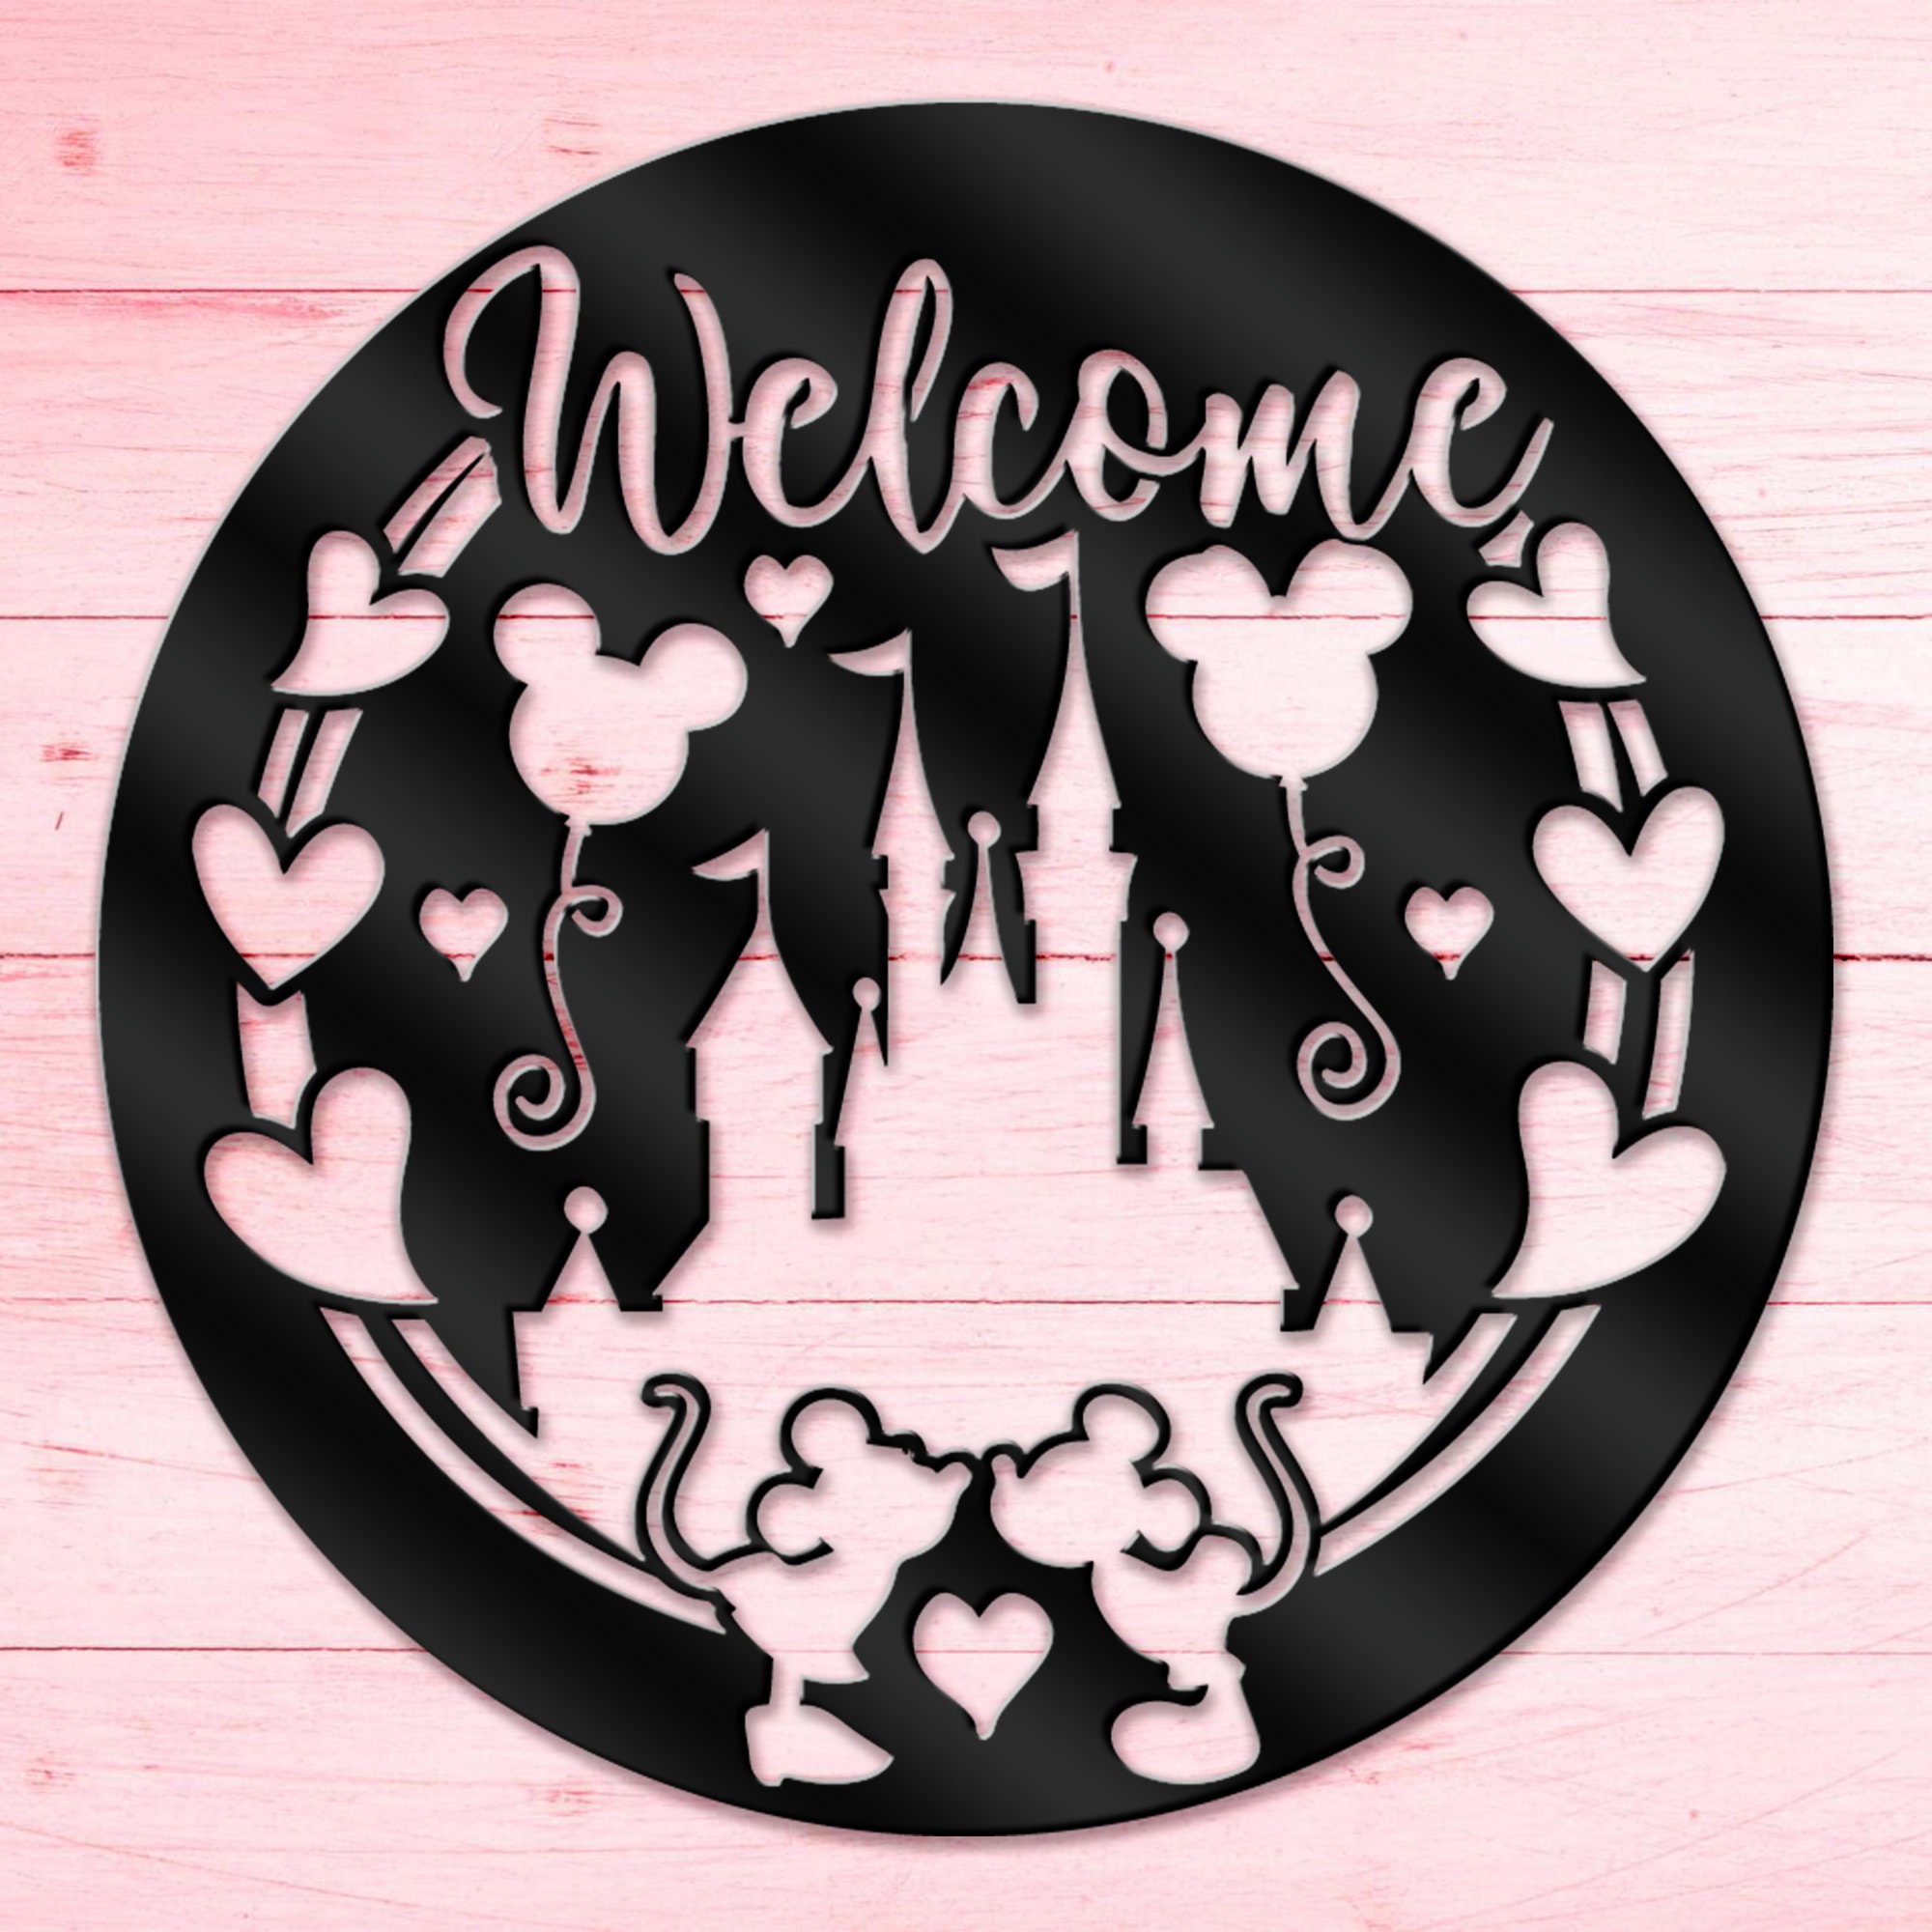 Mickey and Minne Welcome Metal Sign, Disney Inspired Metal Sign